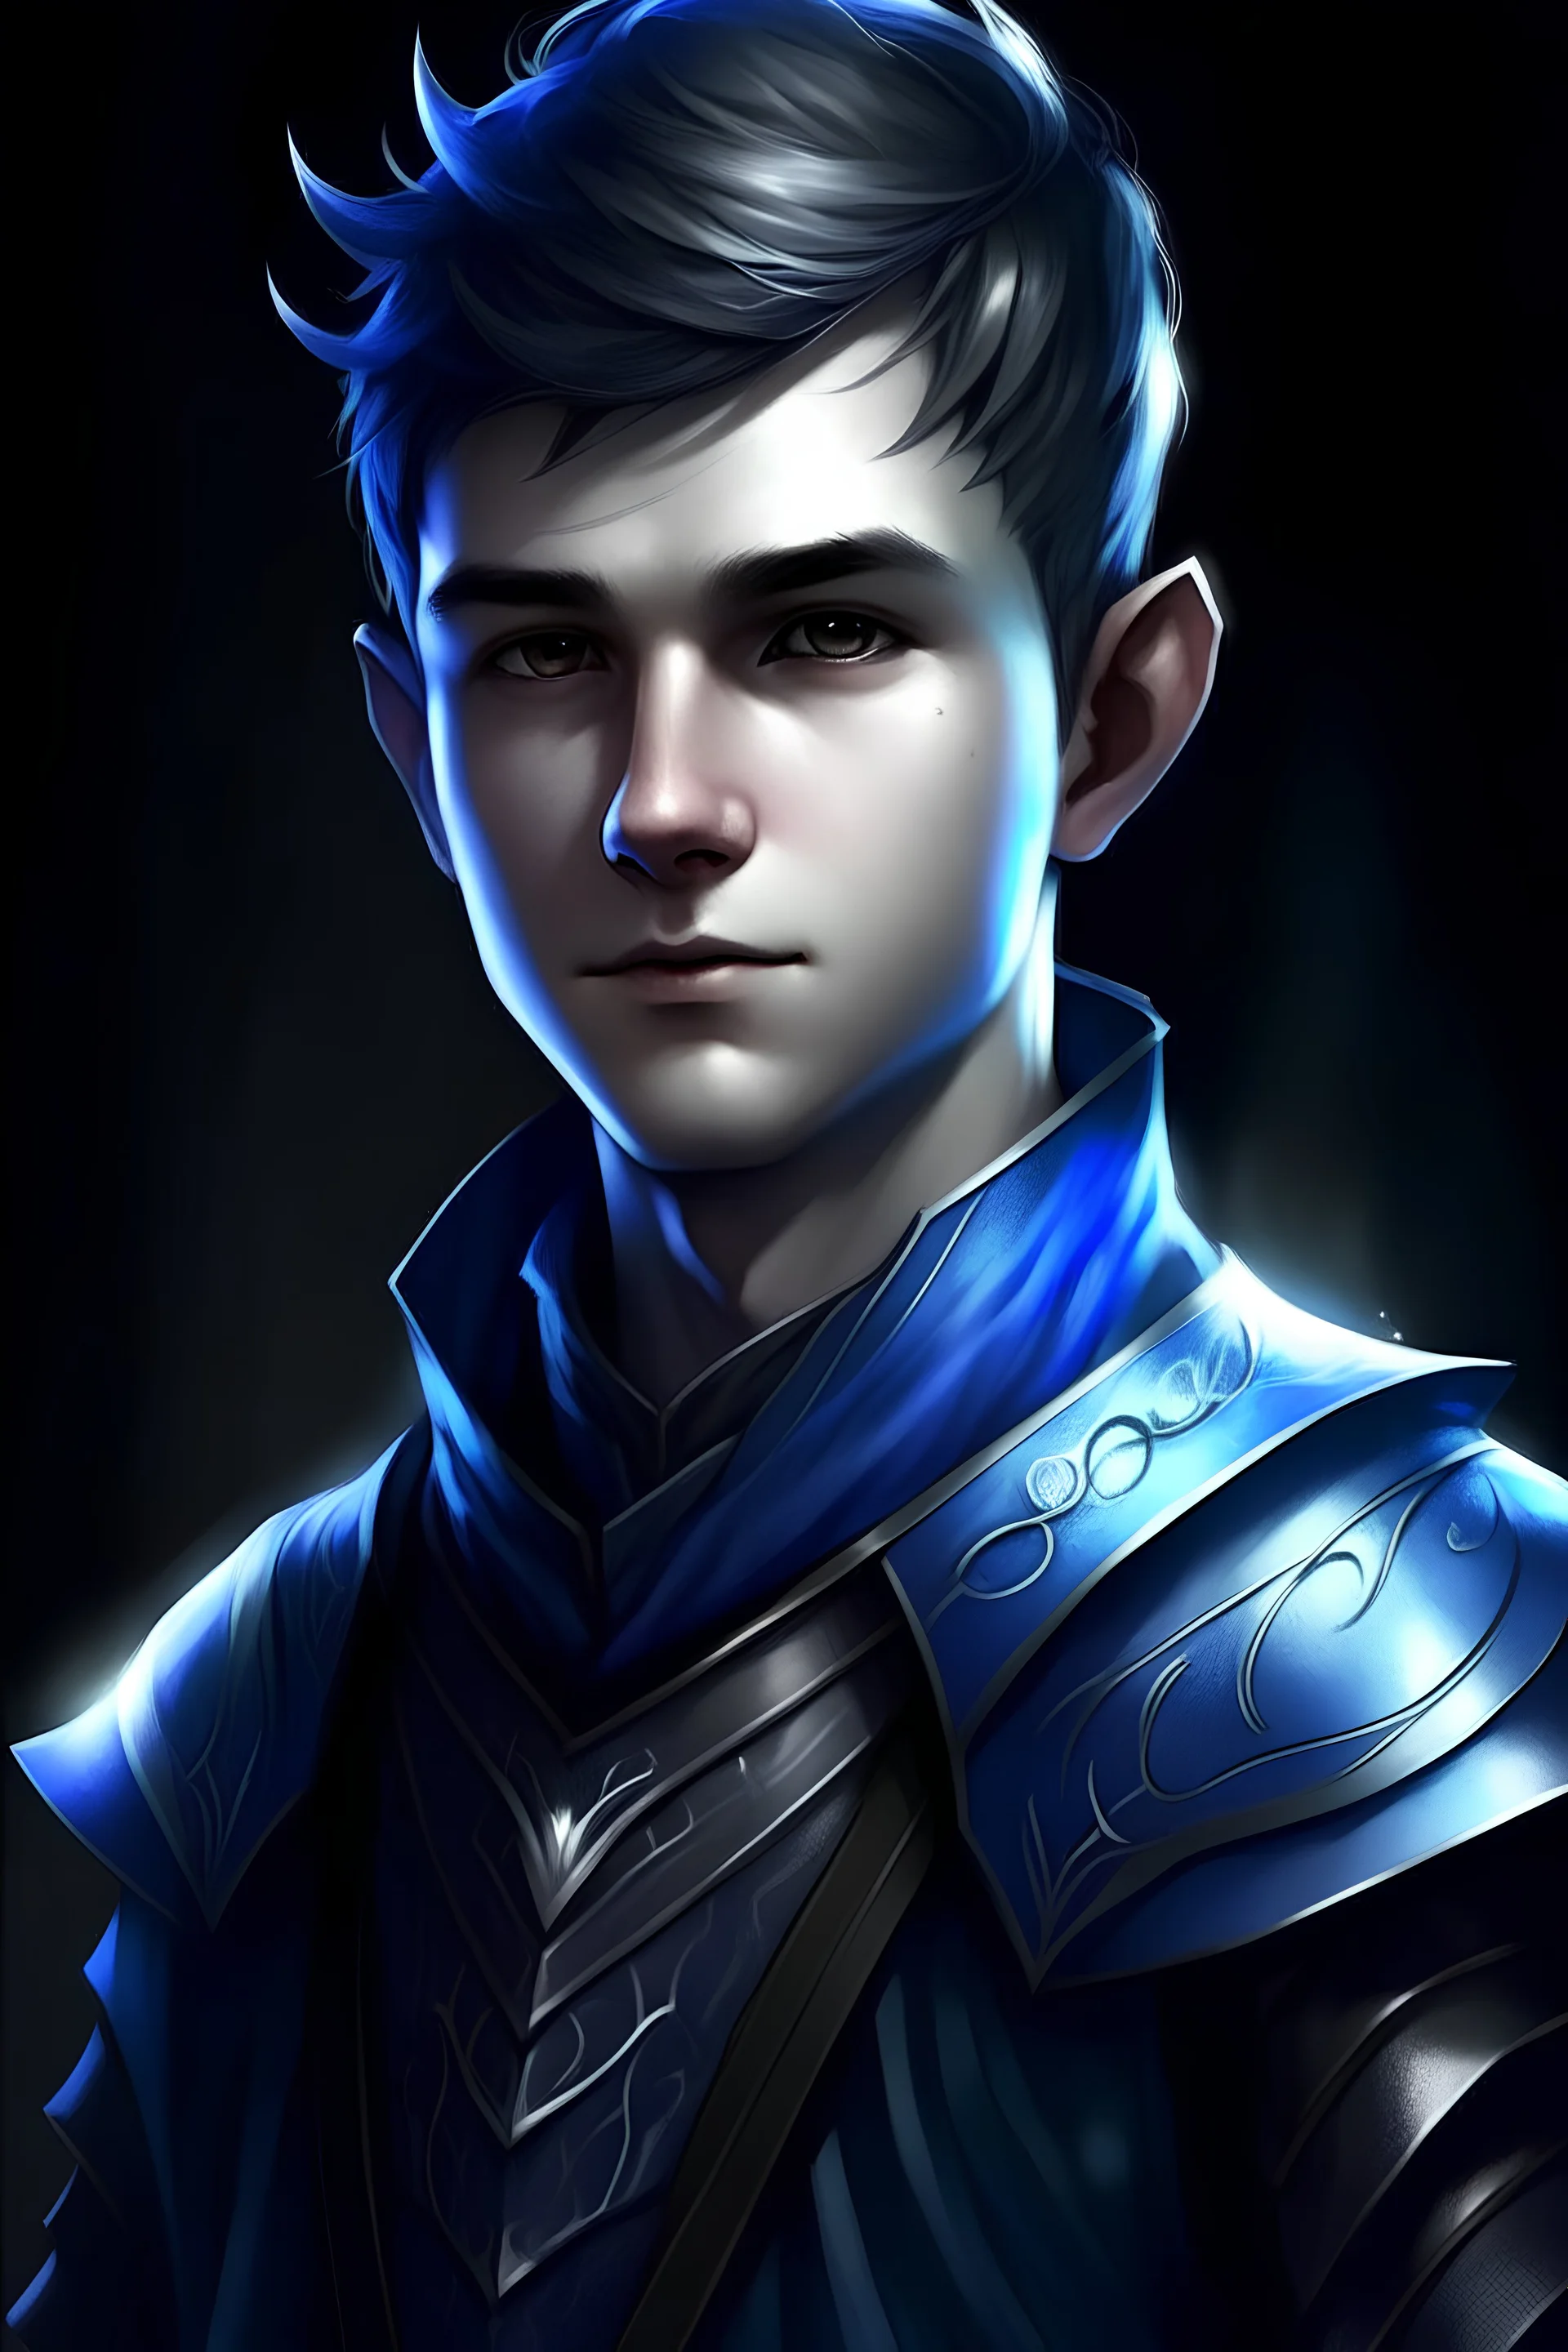 create a young male water genasi from dungeons and dragons, dark short hair, undercut, dark blue eyes, bright skin, wearing vestments, realistic, digital art, high resolution, strong lighting